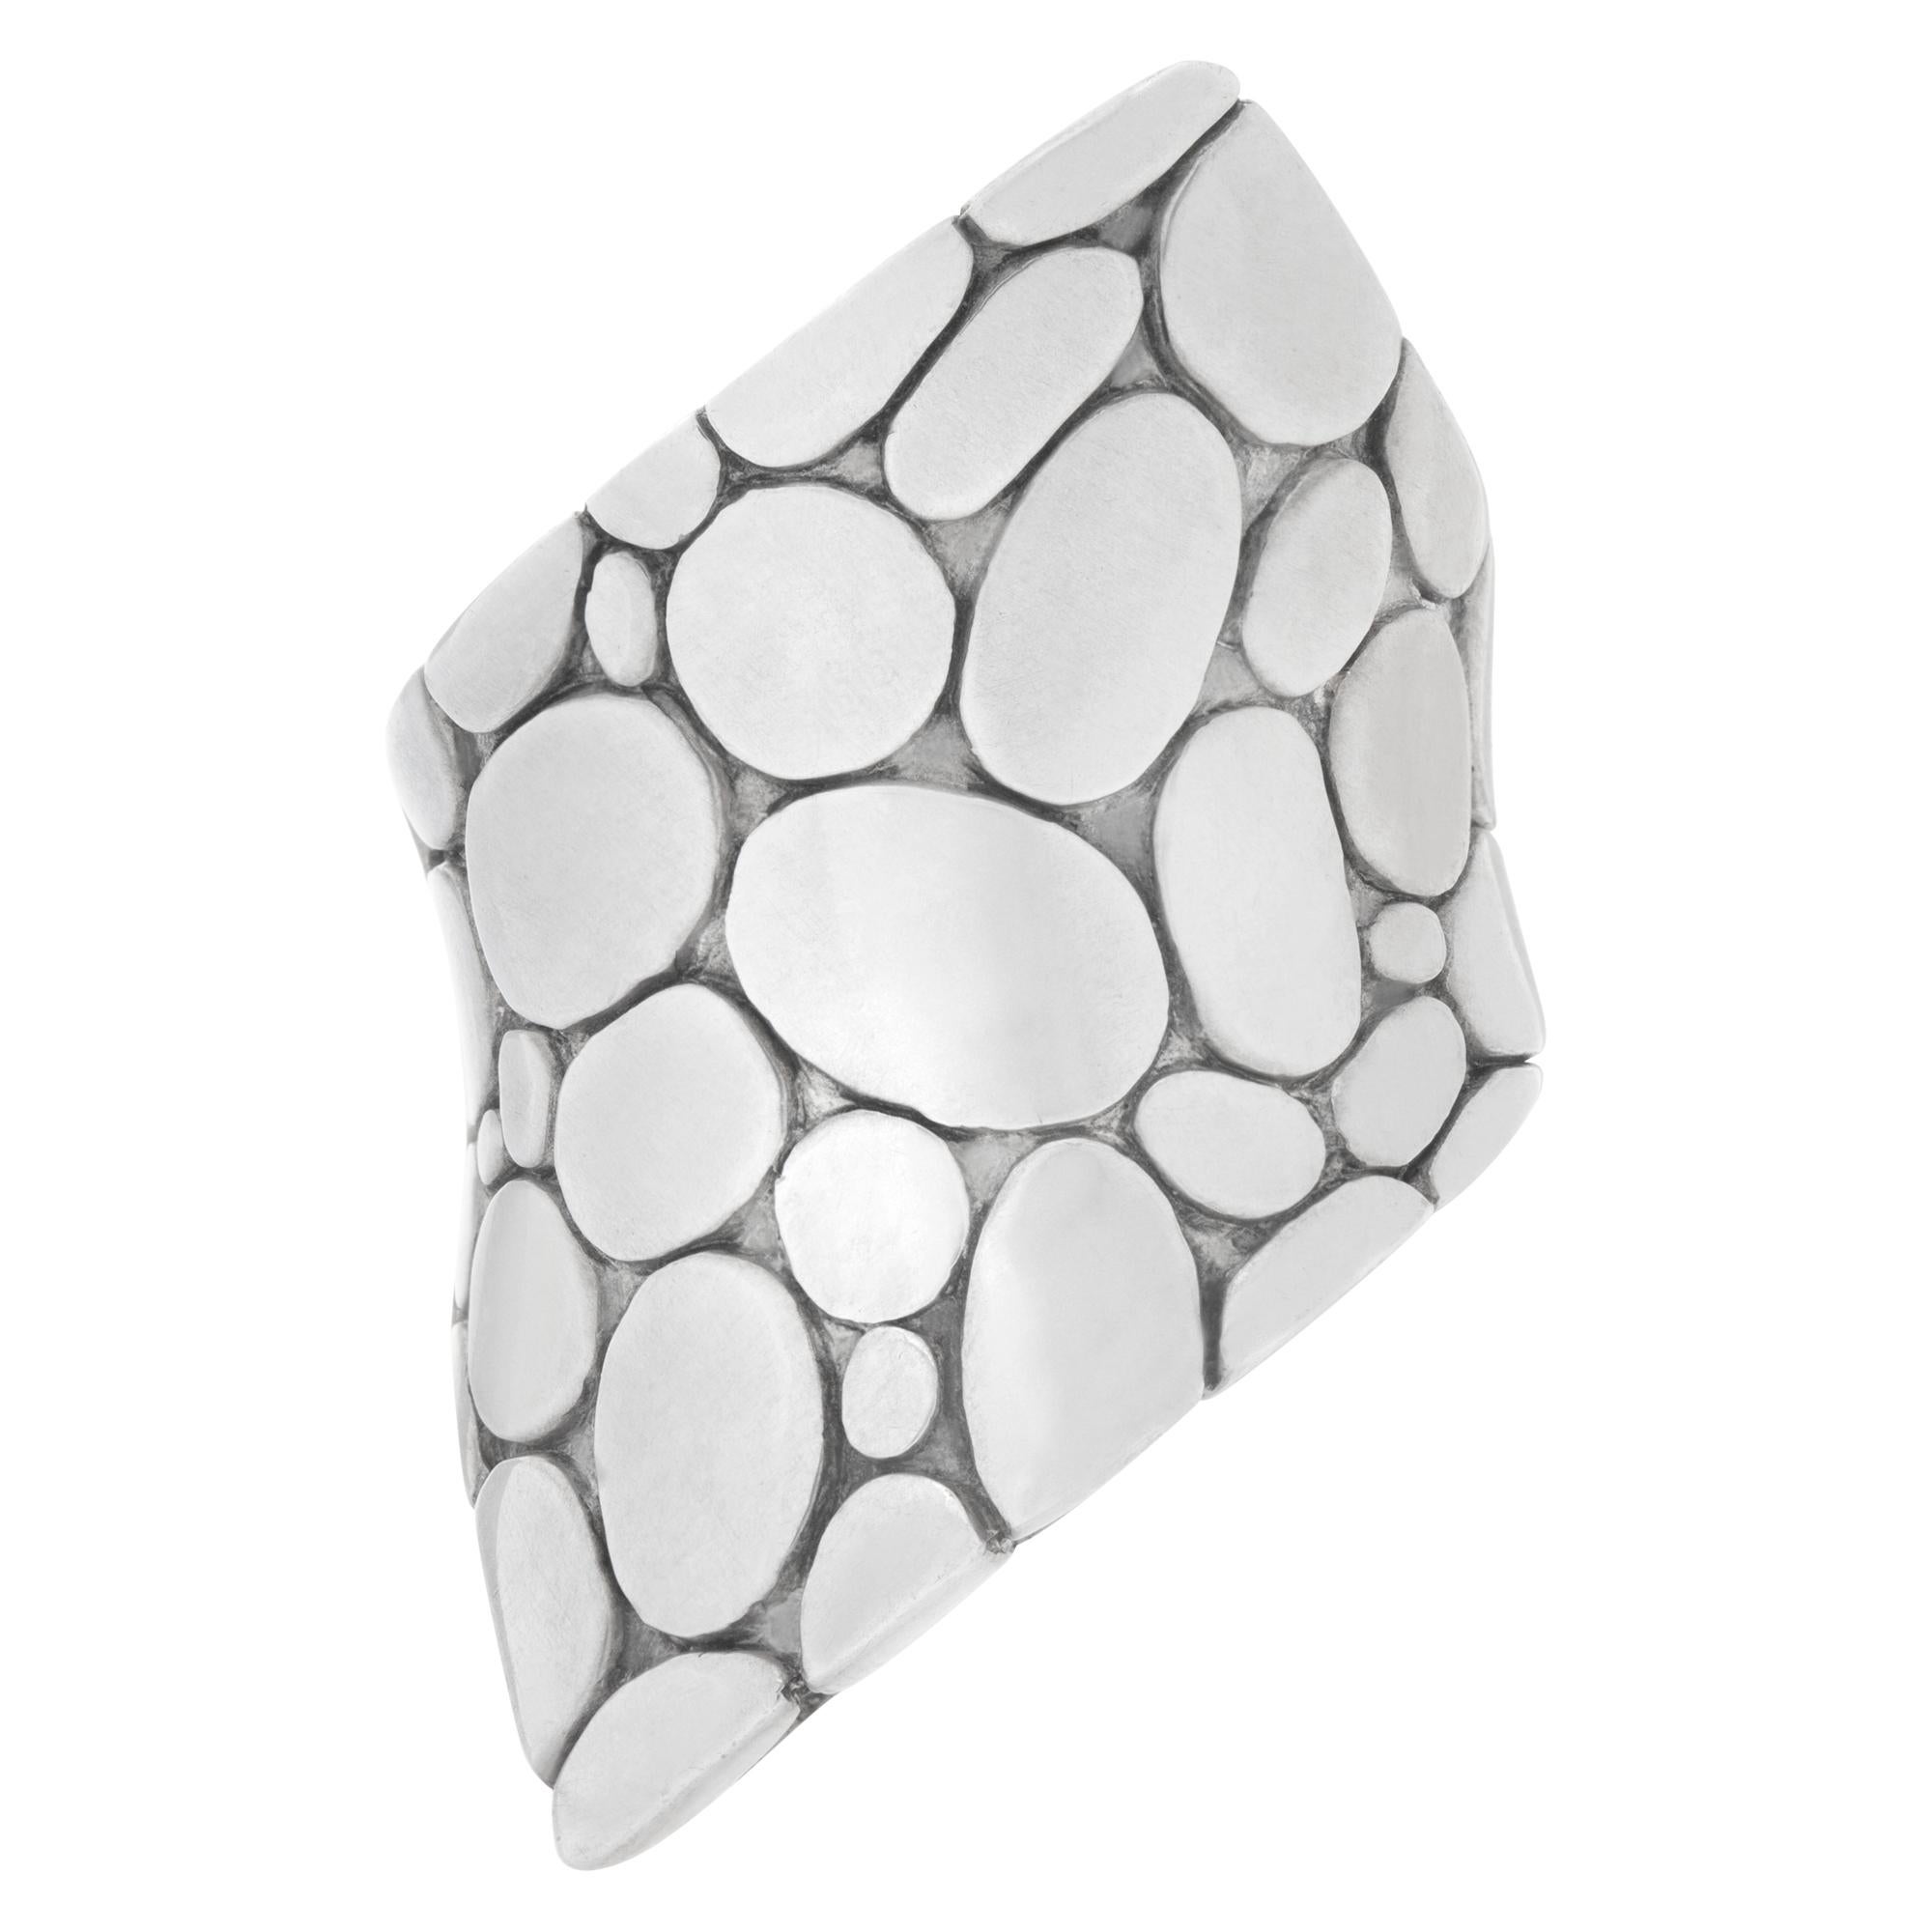 John Hardy Kali Contour ring in sterling silver. Size 6. Ring approximatel 1.5